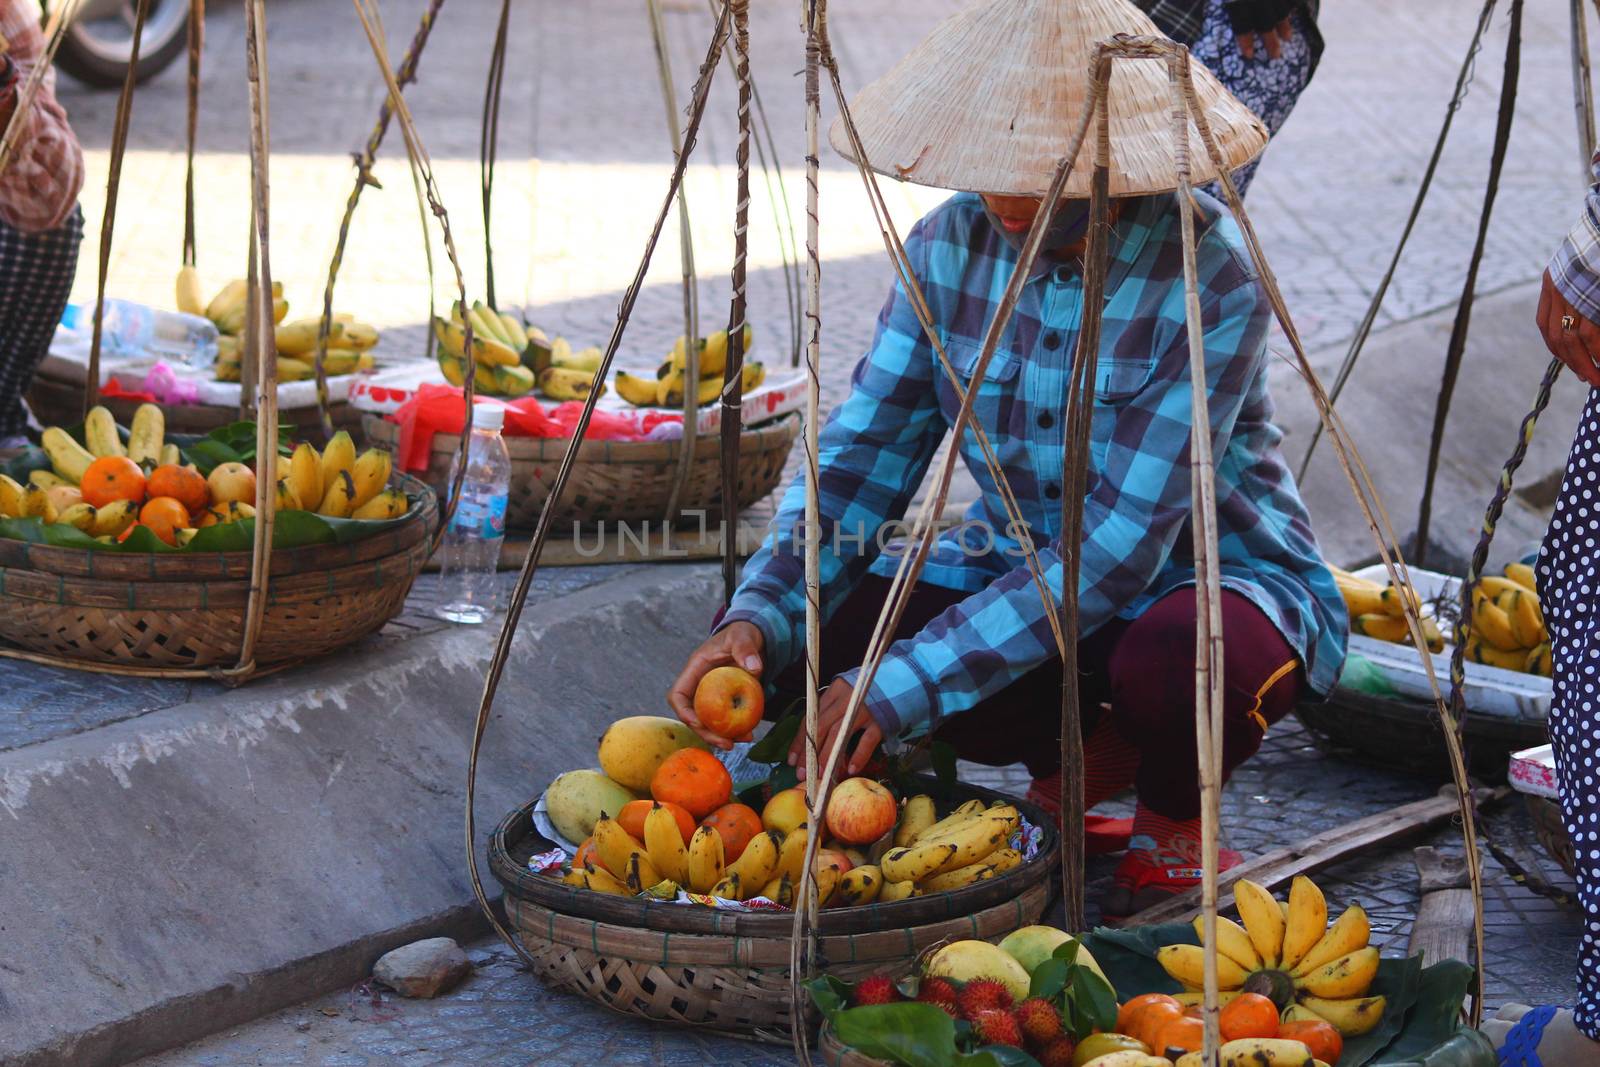 Editorial. Vietnamese Street Vendors Using a Carrying Pole by Sonnet15